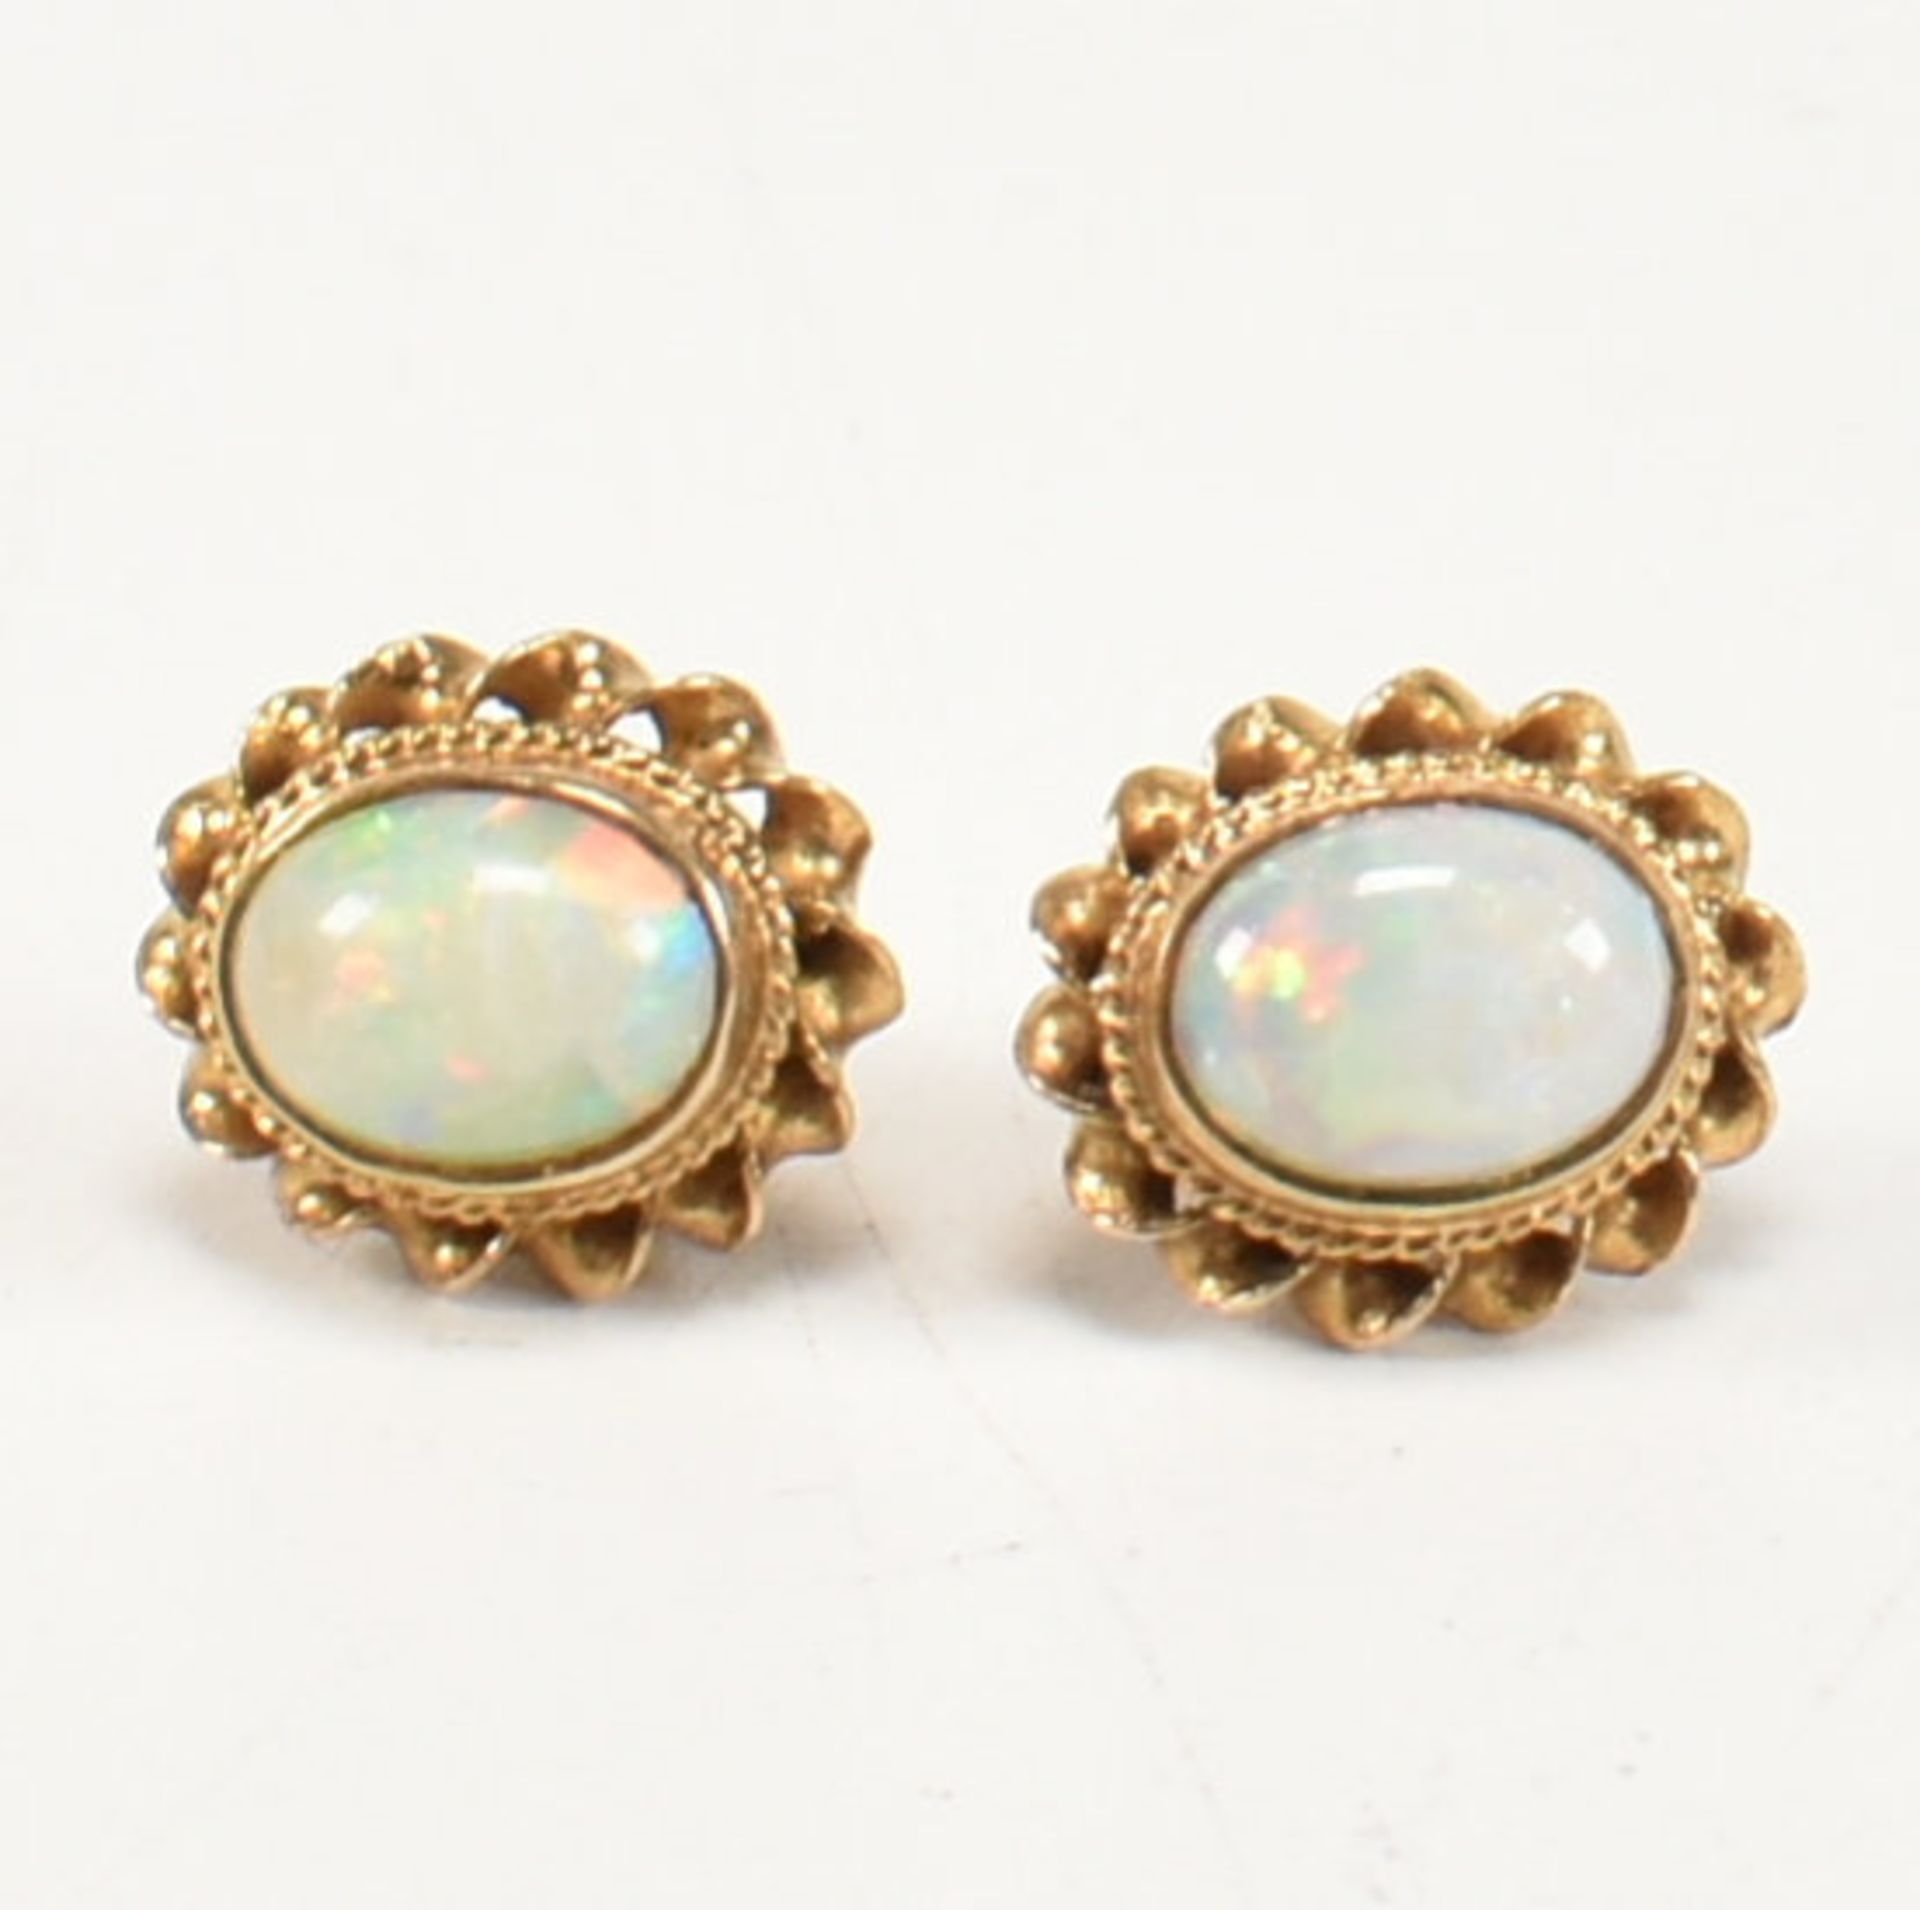 TWO PAIRS OF 9CT GOLD STUD EARRINGS - Image 5 of 8